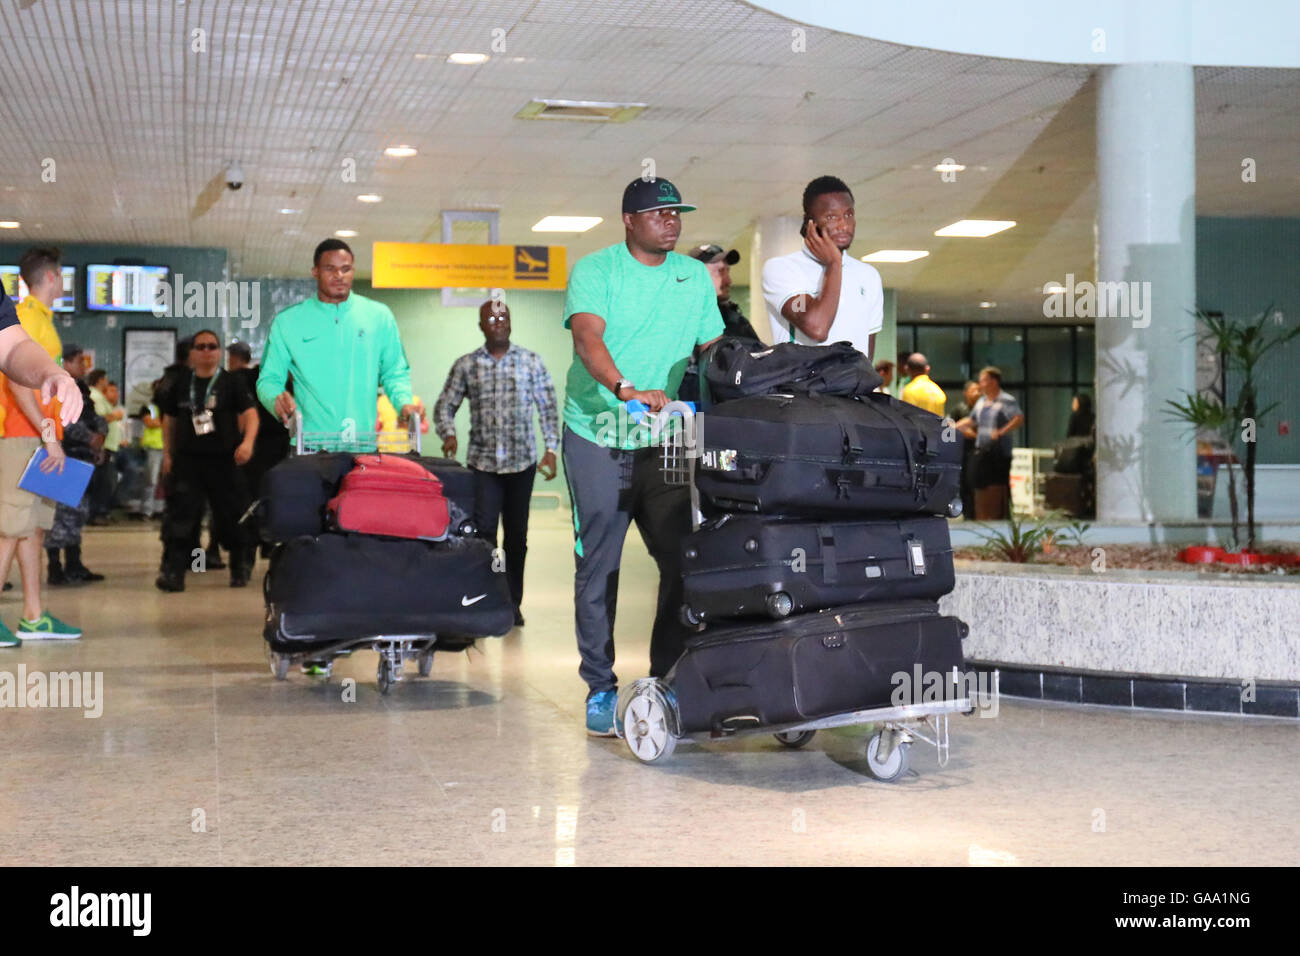 Manaus, Brazil. 4th Aug, 2016. Nigeria team group (NGR) Football/Soccer : Nigeria team arrived at the airport during the Rio 2016 Olympic Games in Manaus, Brazil . © YUTAKA/AFLO SPORT/Alamy Live News Stock Photo